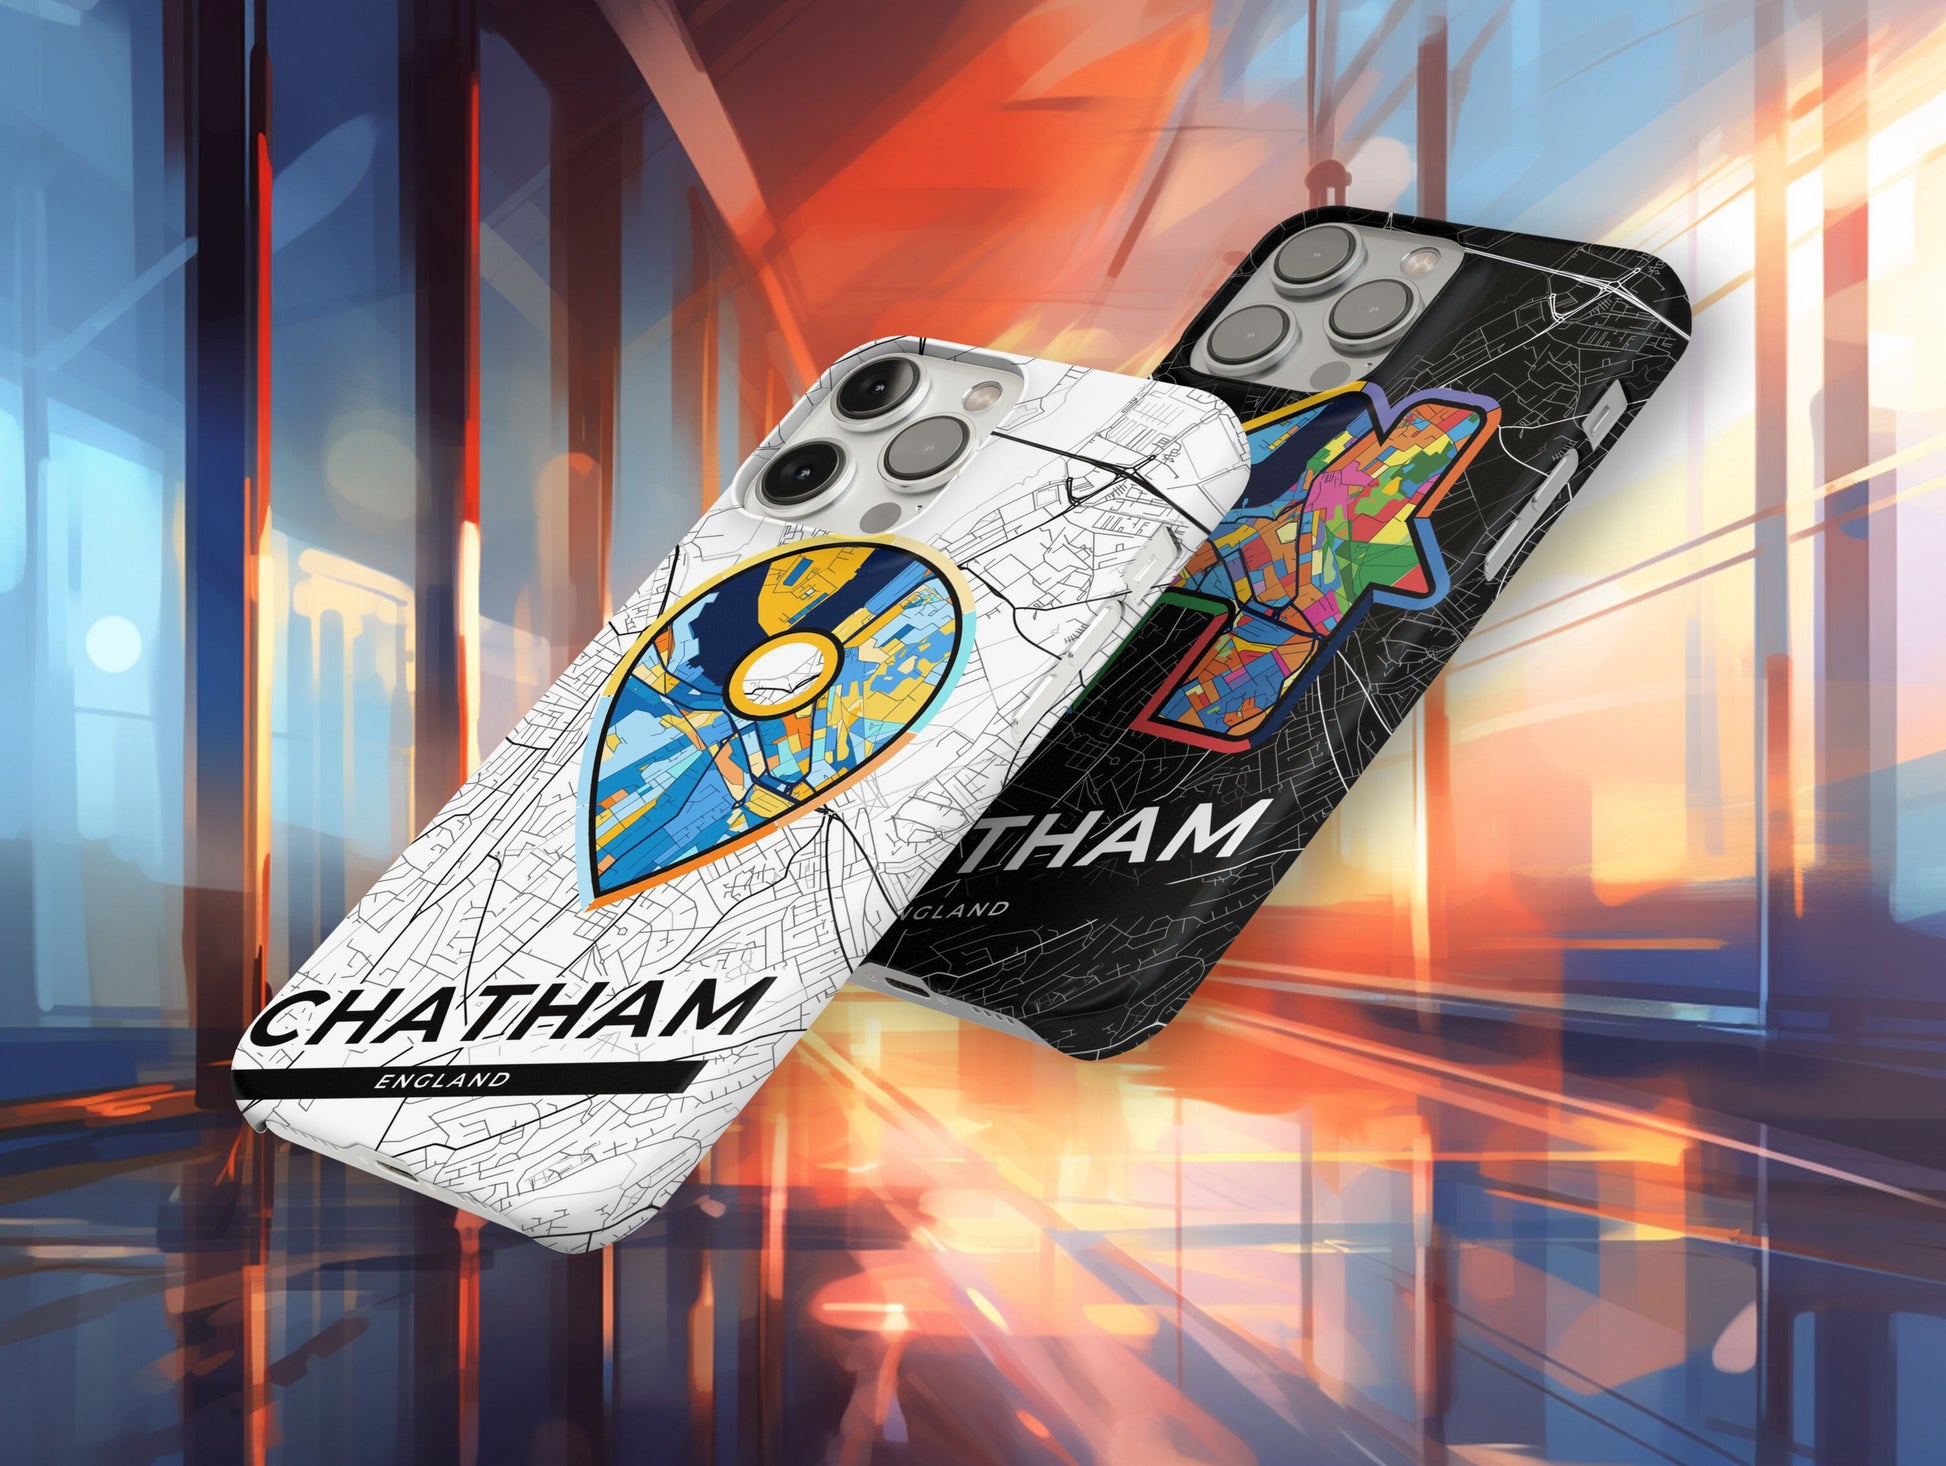 Chatham England slim phone case with colorful icon. Birthday, wedding or housewarming gift. Couple match cases.